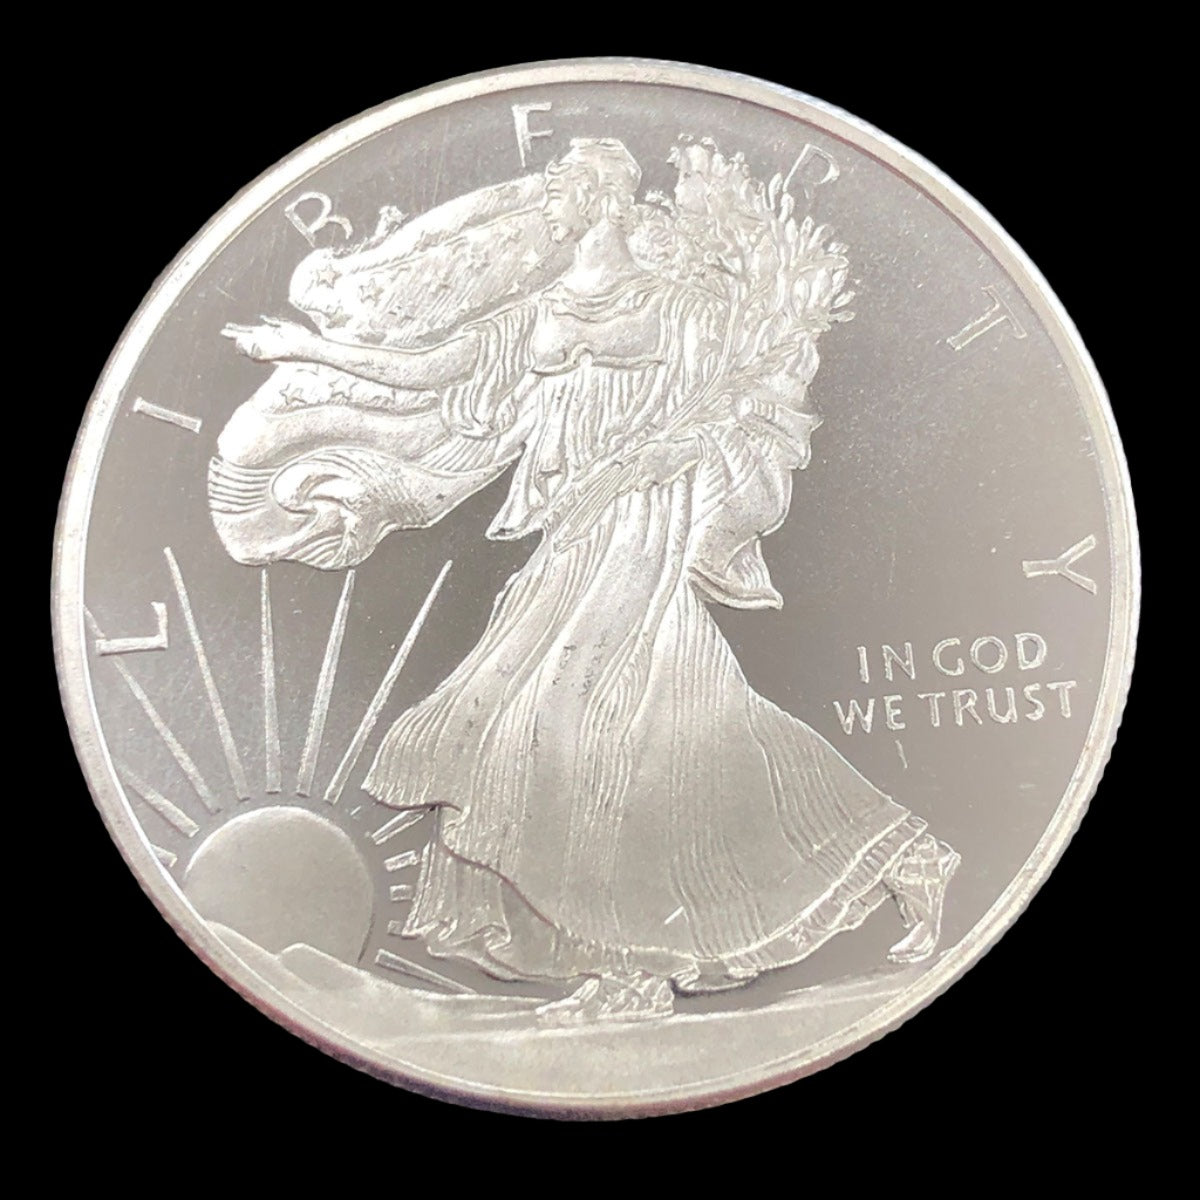 1/2 oz Silver Rounds (Secondary)